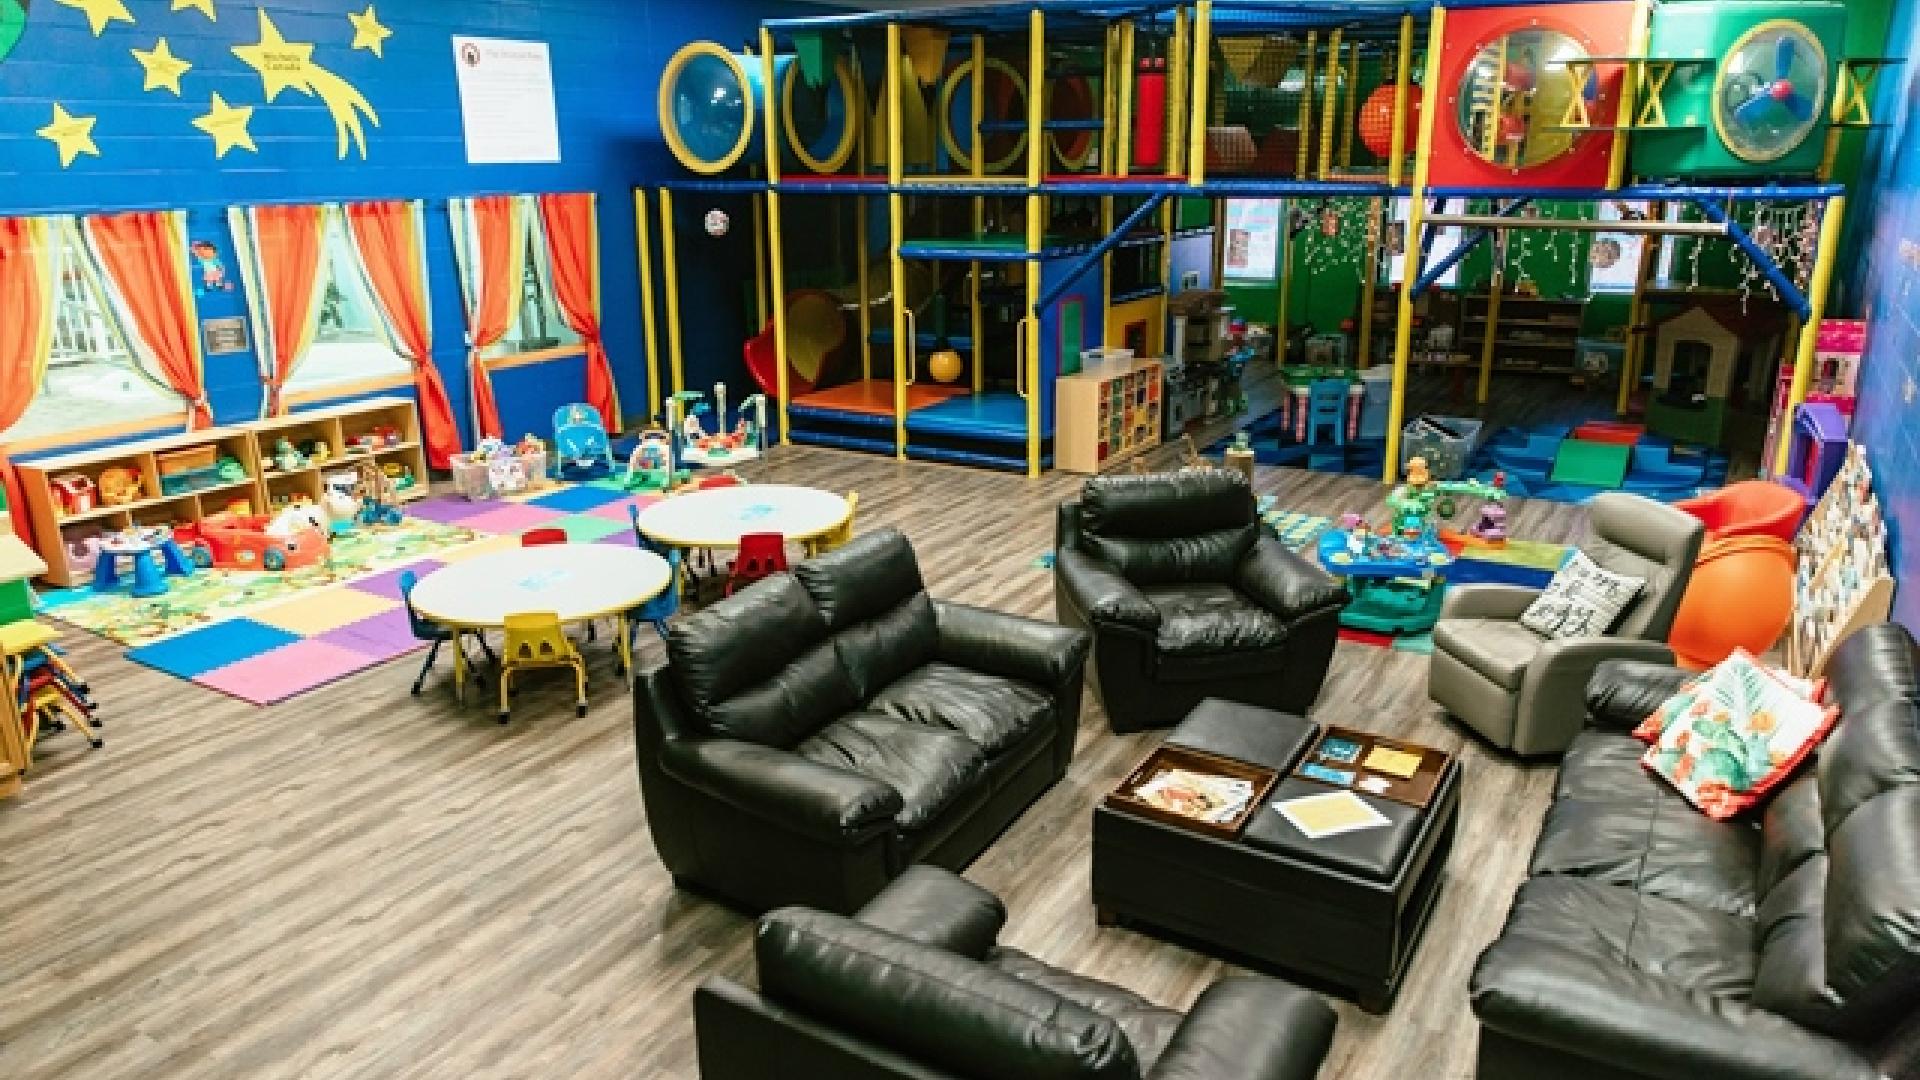 Playground interior. There are some tables, chairs, sofas and lounging chairs throughout the room. The room's paint scheme is bright and colourful.